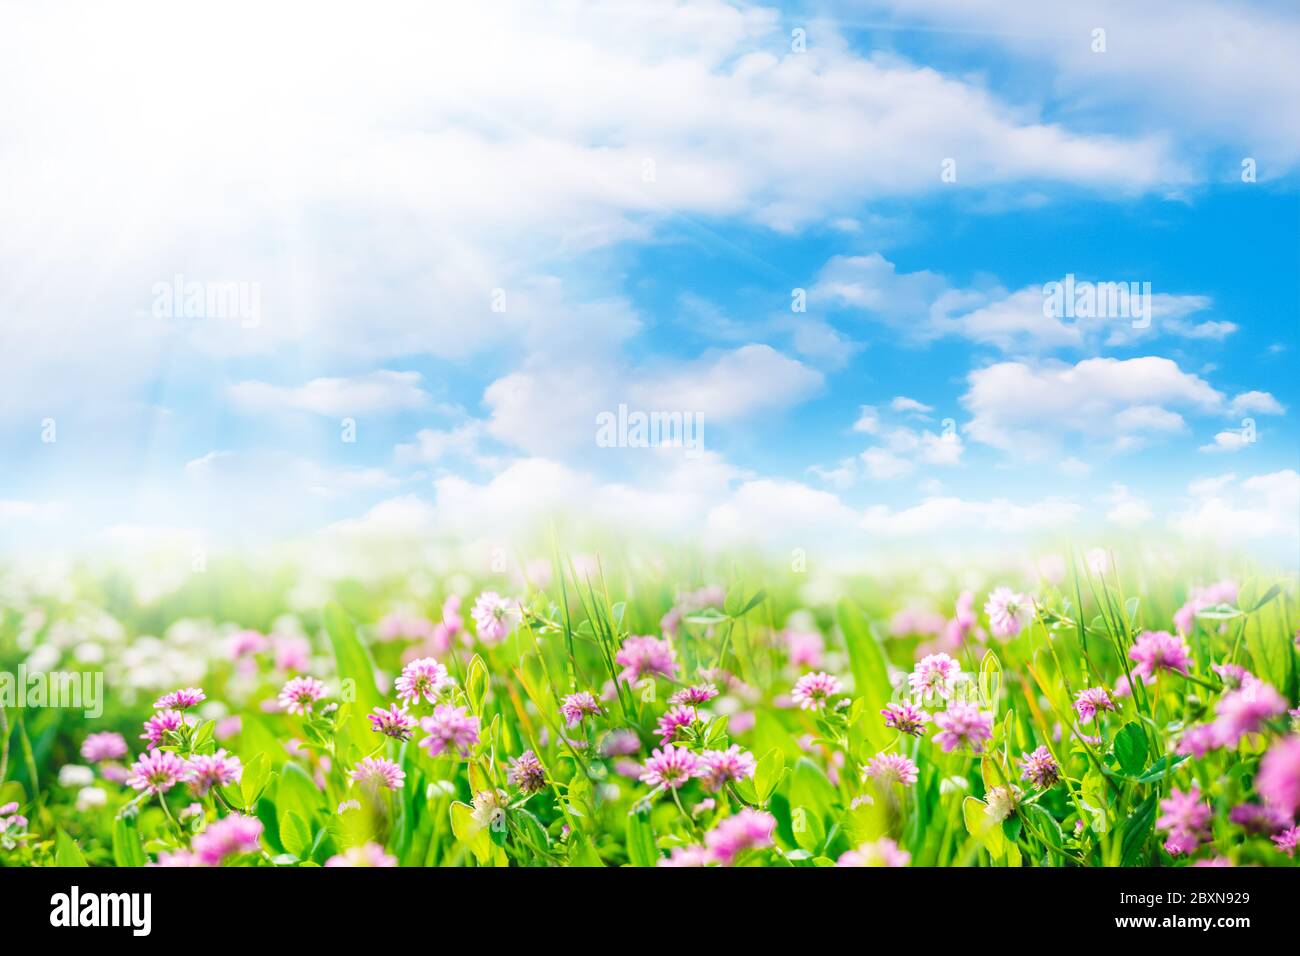 Clover flowers in green field with sunshine. Spring or summer natural landscape with blue sky and white clouds Stock Photo